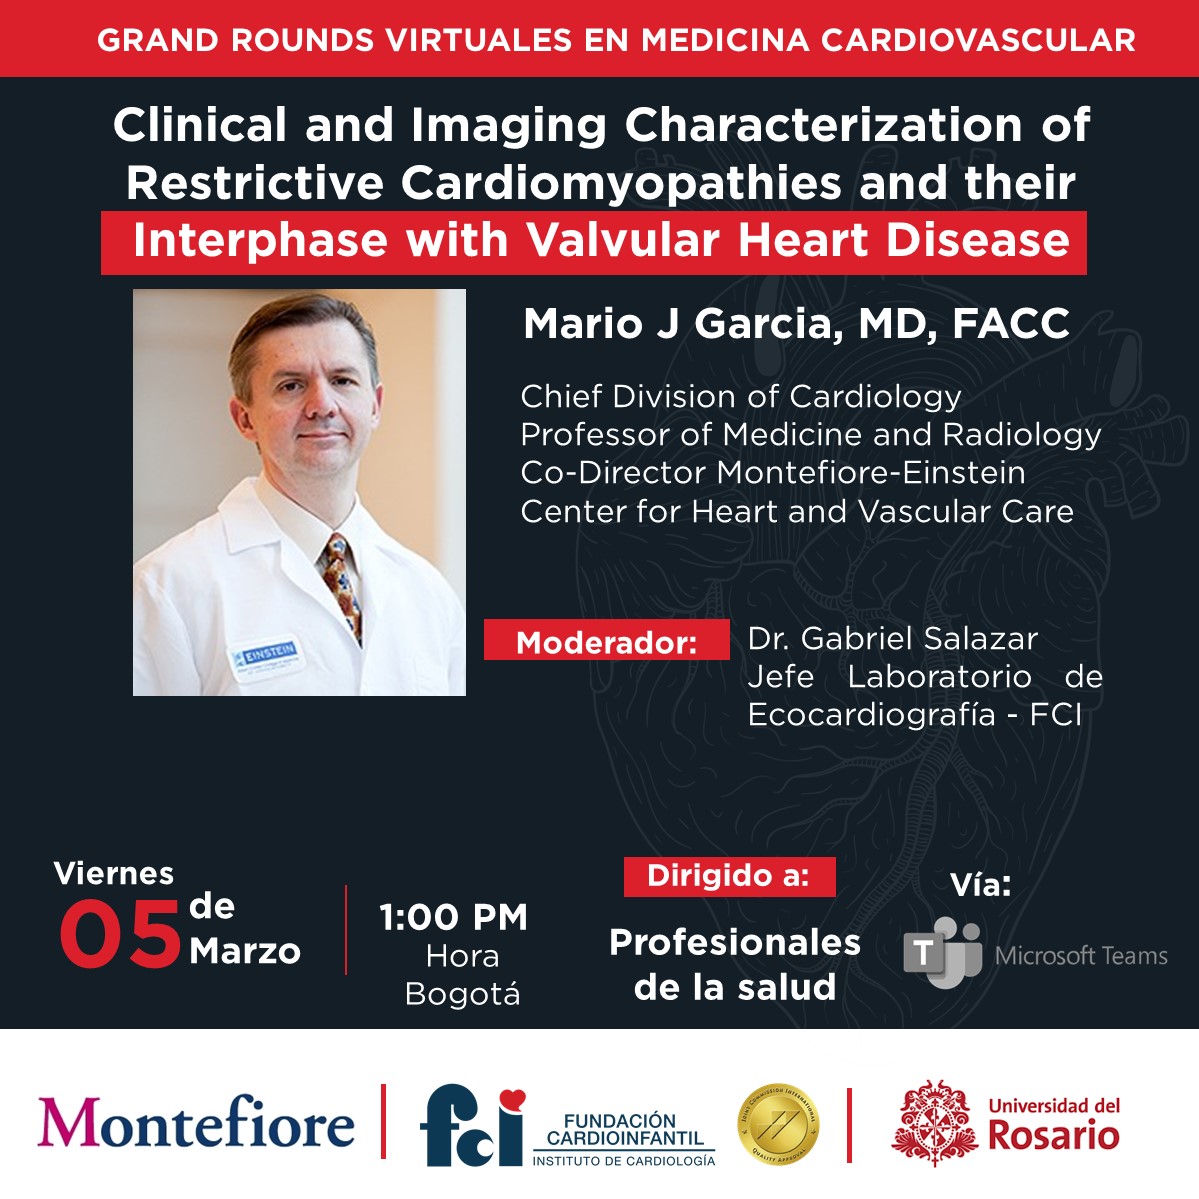 Webinar: Clinical and Imaging Characterization of Restrictive Cardiomyopathies and their Interphase with Valvular Heart Disease